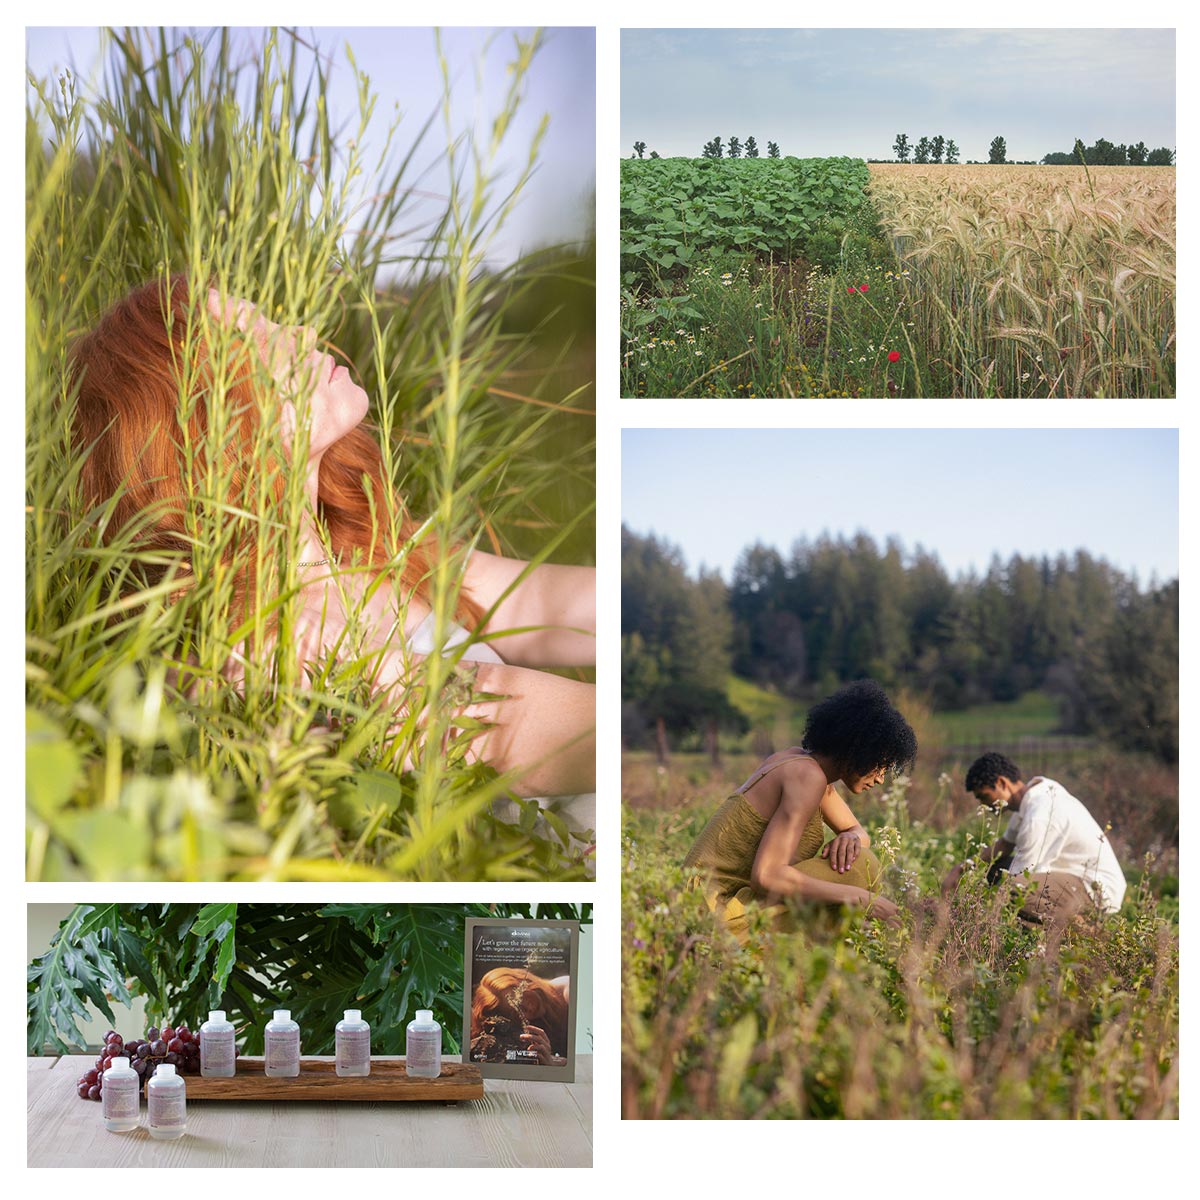 sustainable regenerative agriculture collage 